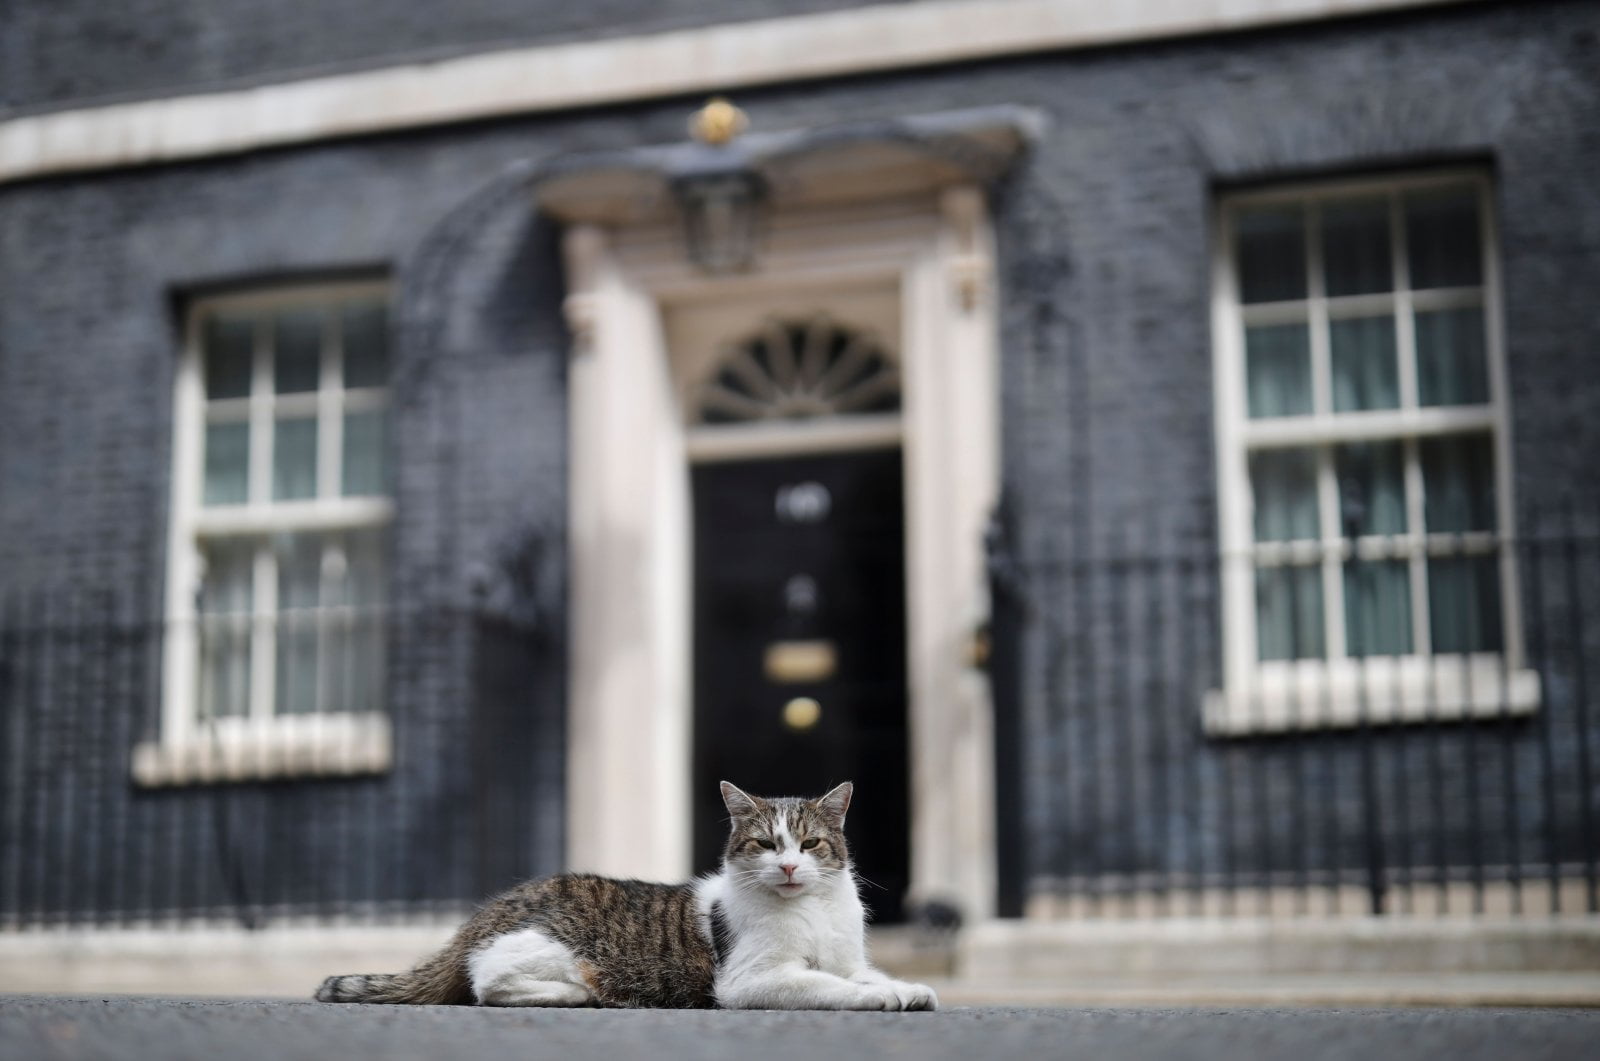 Larry, Chief Mouser at 10 Downing Street